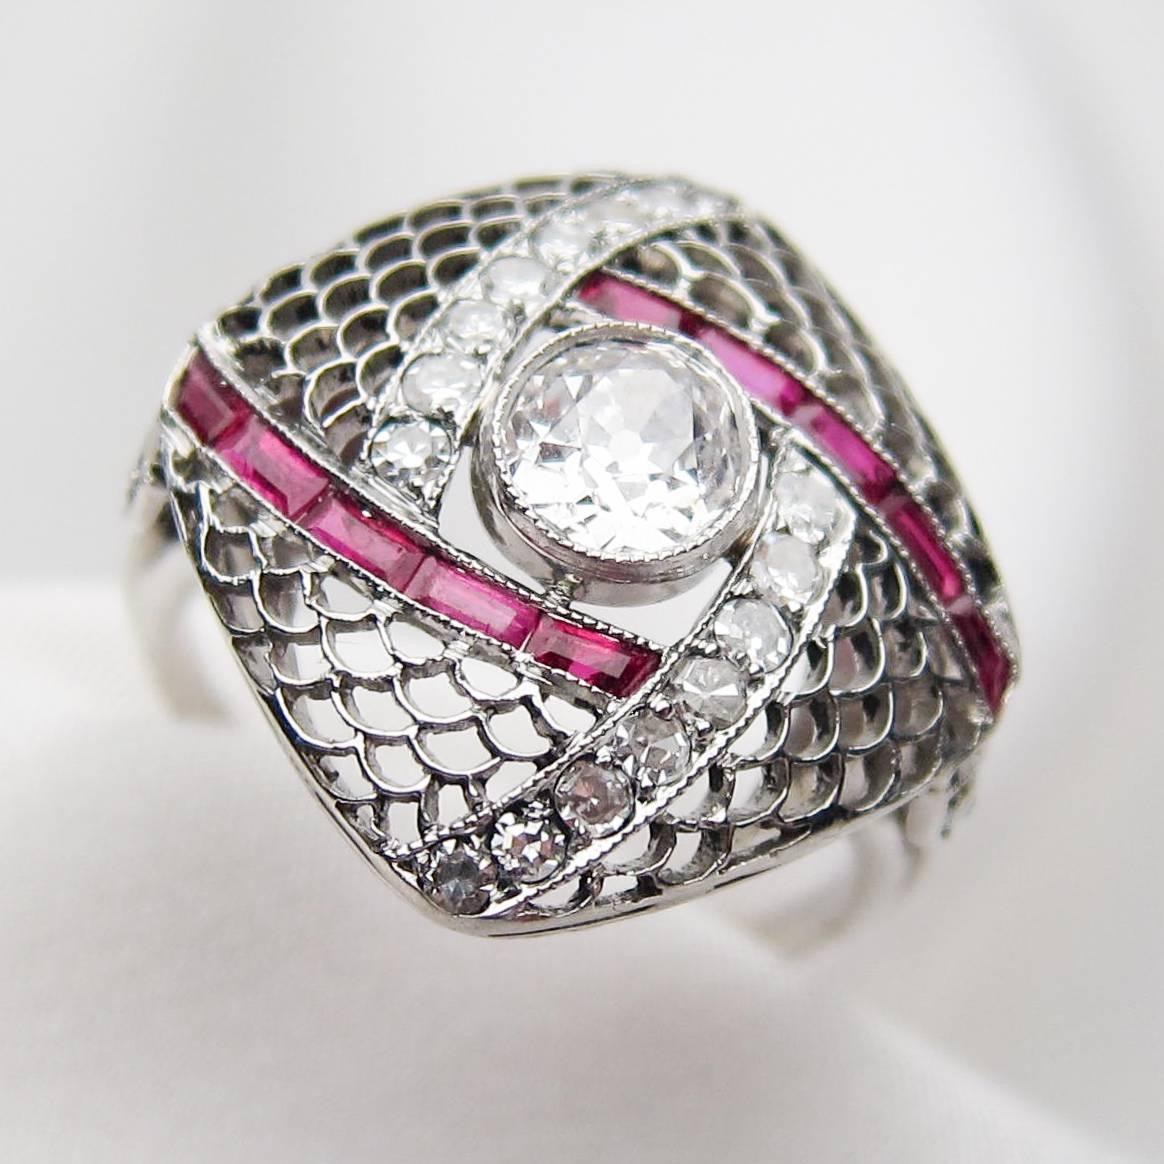 Circa 1930. This intriguing platinum Art Deco filigree ring features the dynamic contrast between icy diamonds and lush rubies. The diagonal, square cushion-shaped top of the ring features a central, bezel-set, old European-cut diamond weighing .53